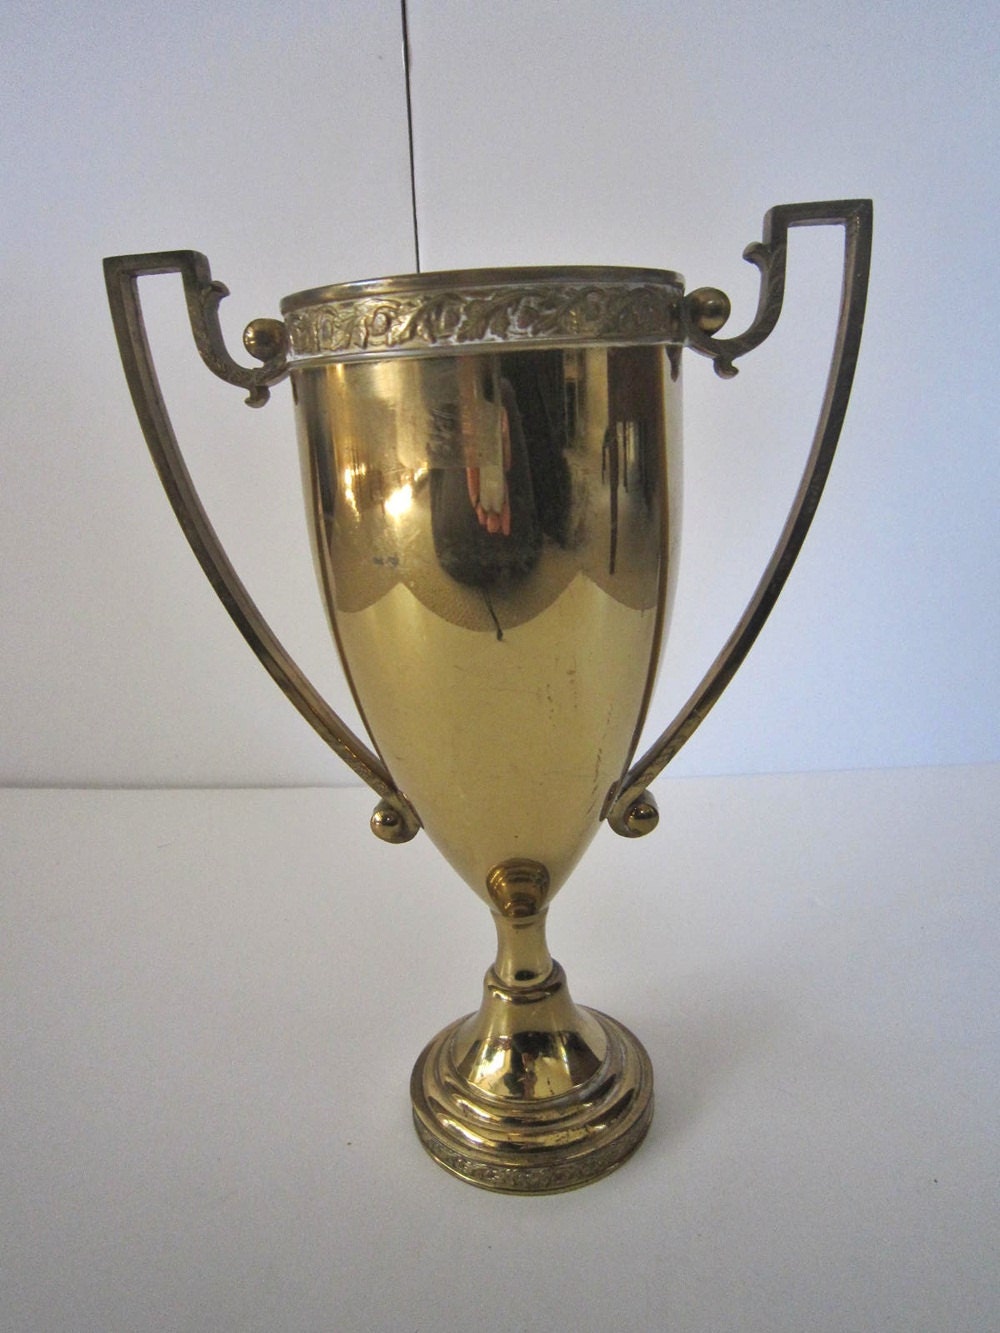 on  Etsy Vintage Loving by Trophy vintage Cup FloridaFound loving Brass Inc. Dodge cups